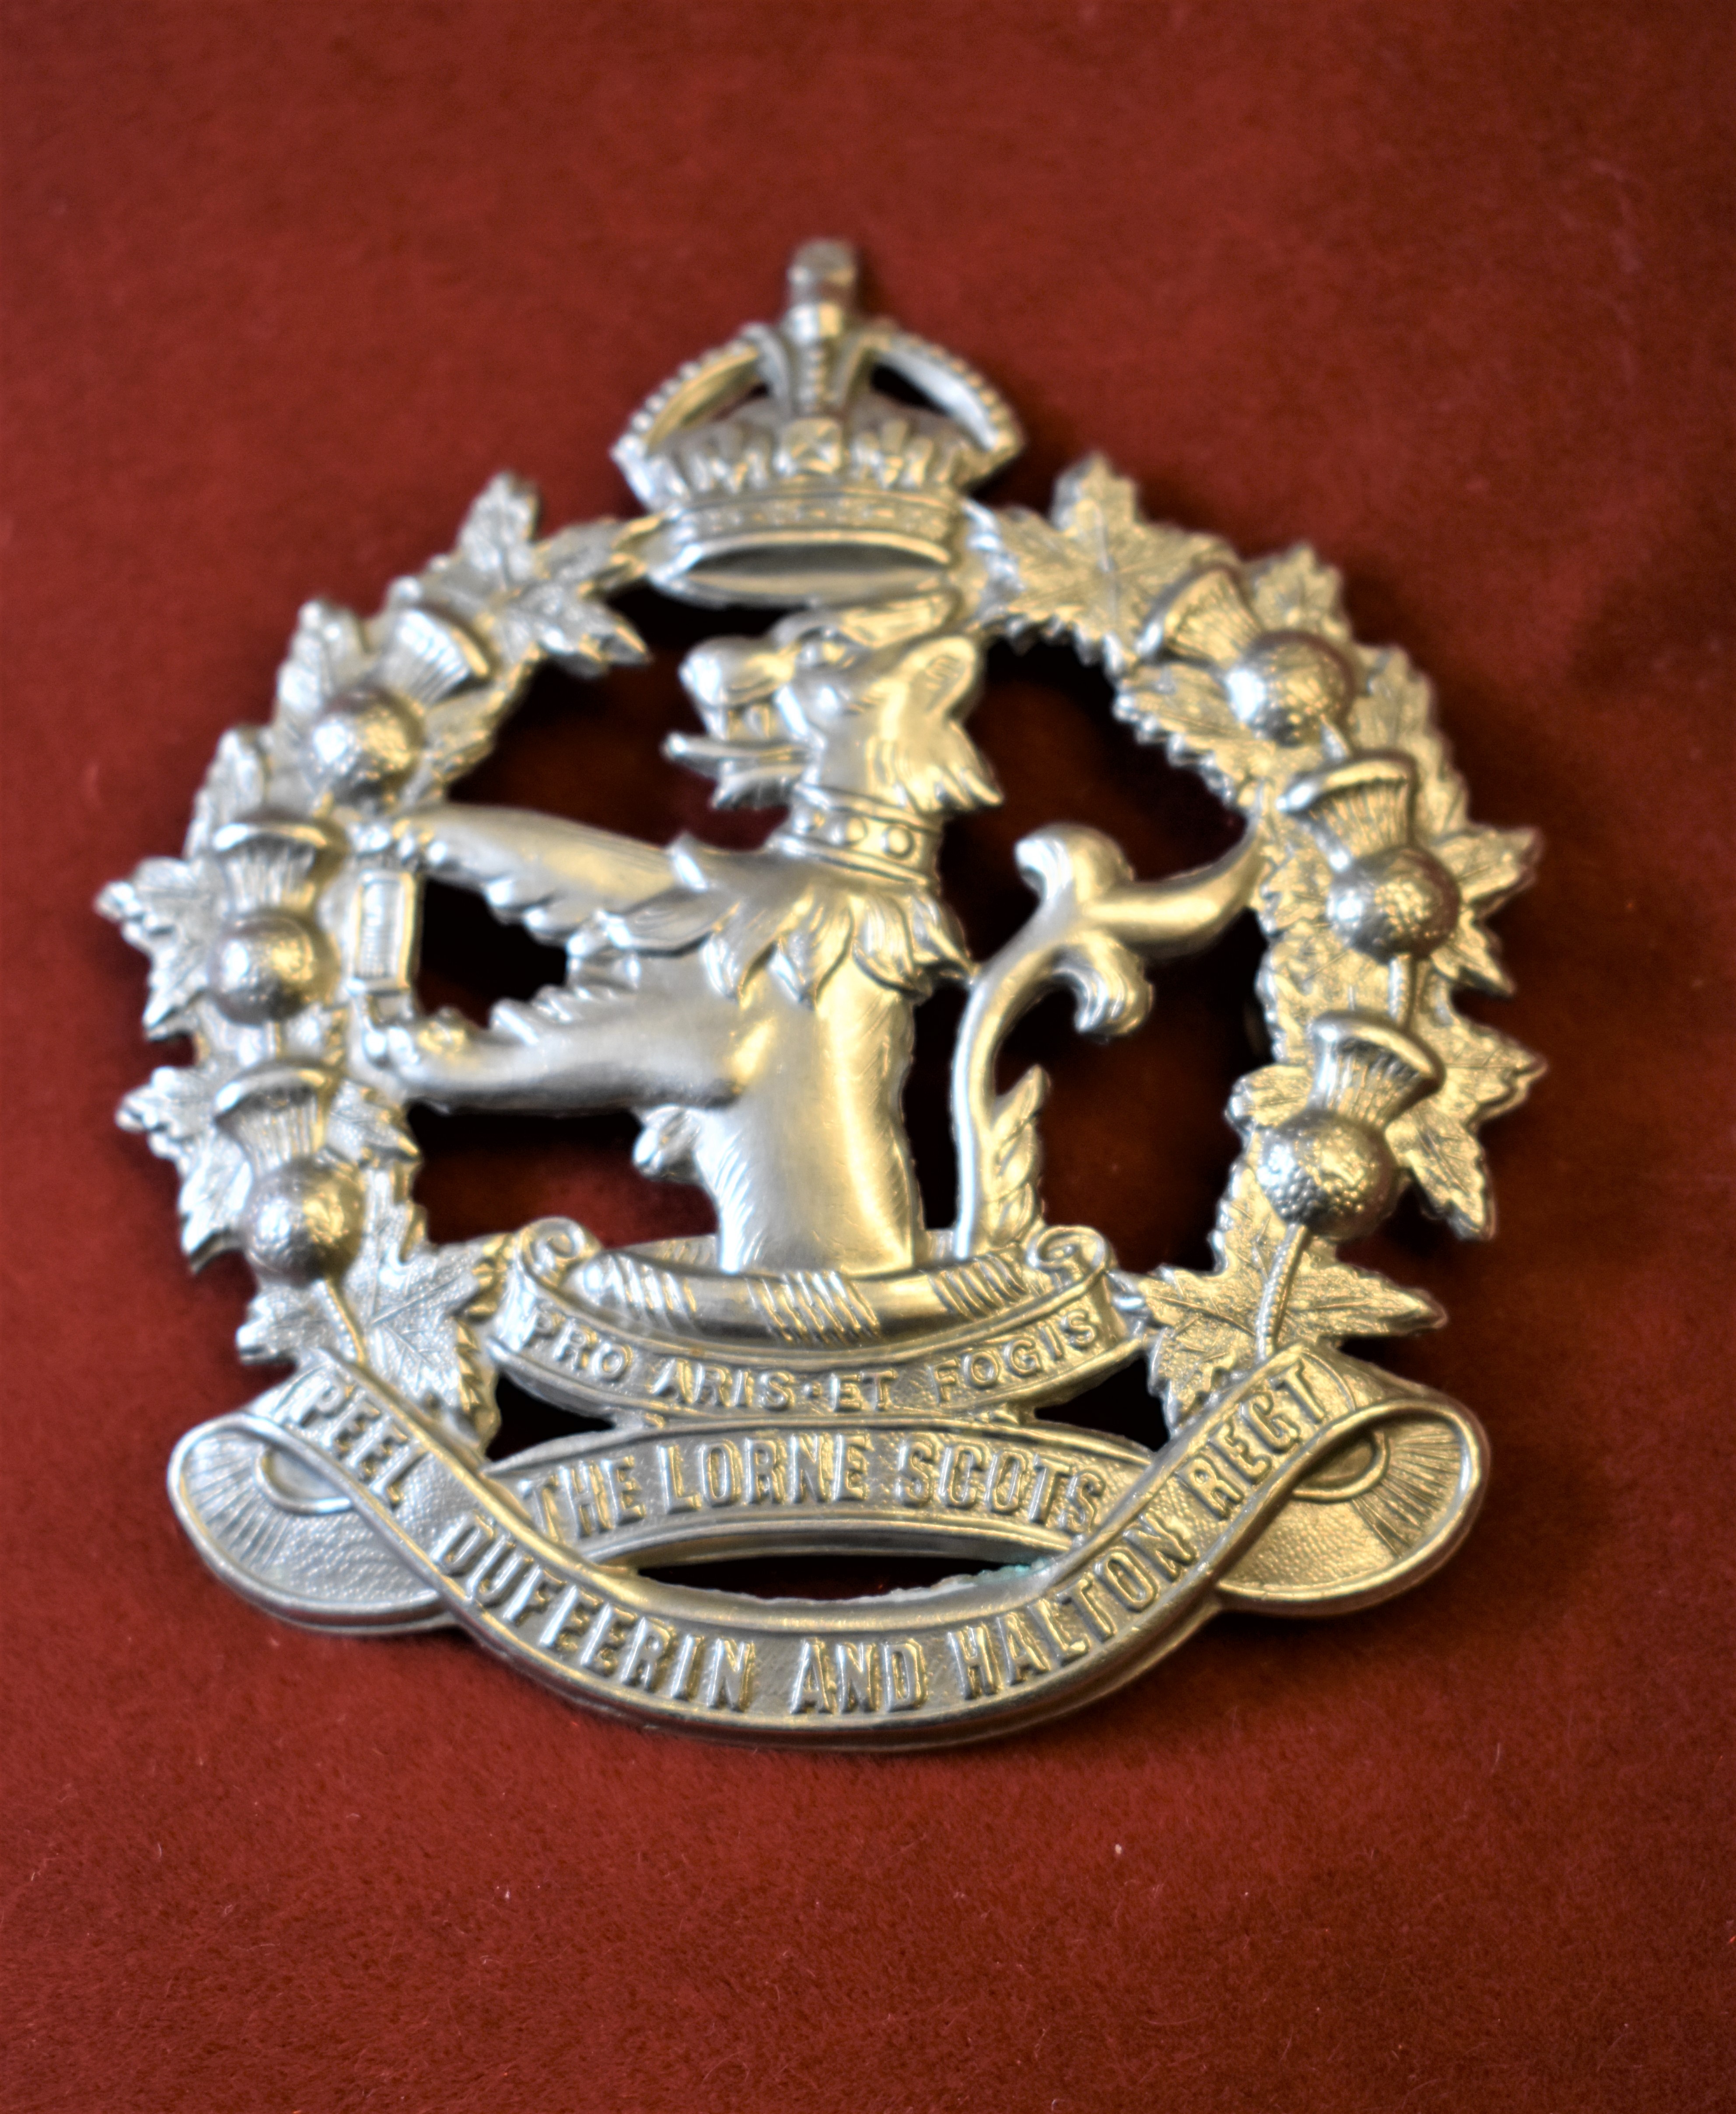 Canadian The Lorne Scouts (Peel Dufferin and Halton Regt) WWII Glengarry Cap Badge, w/m, two lugs.